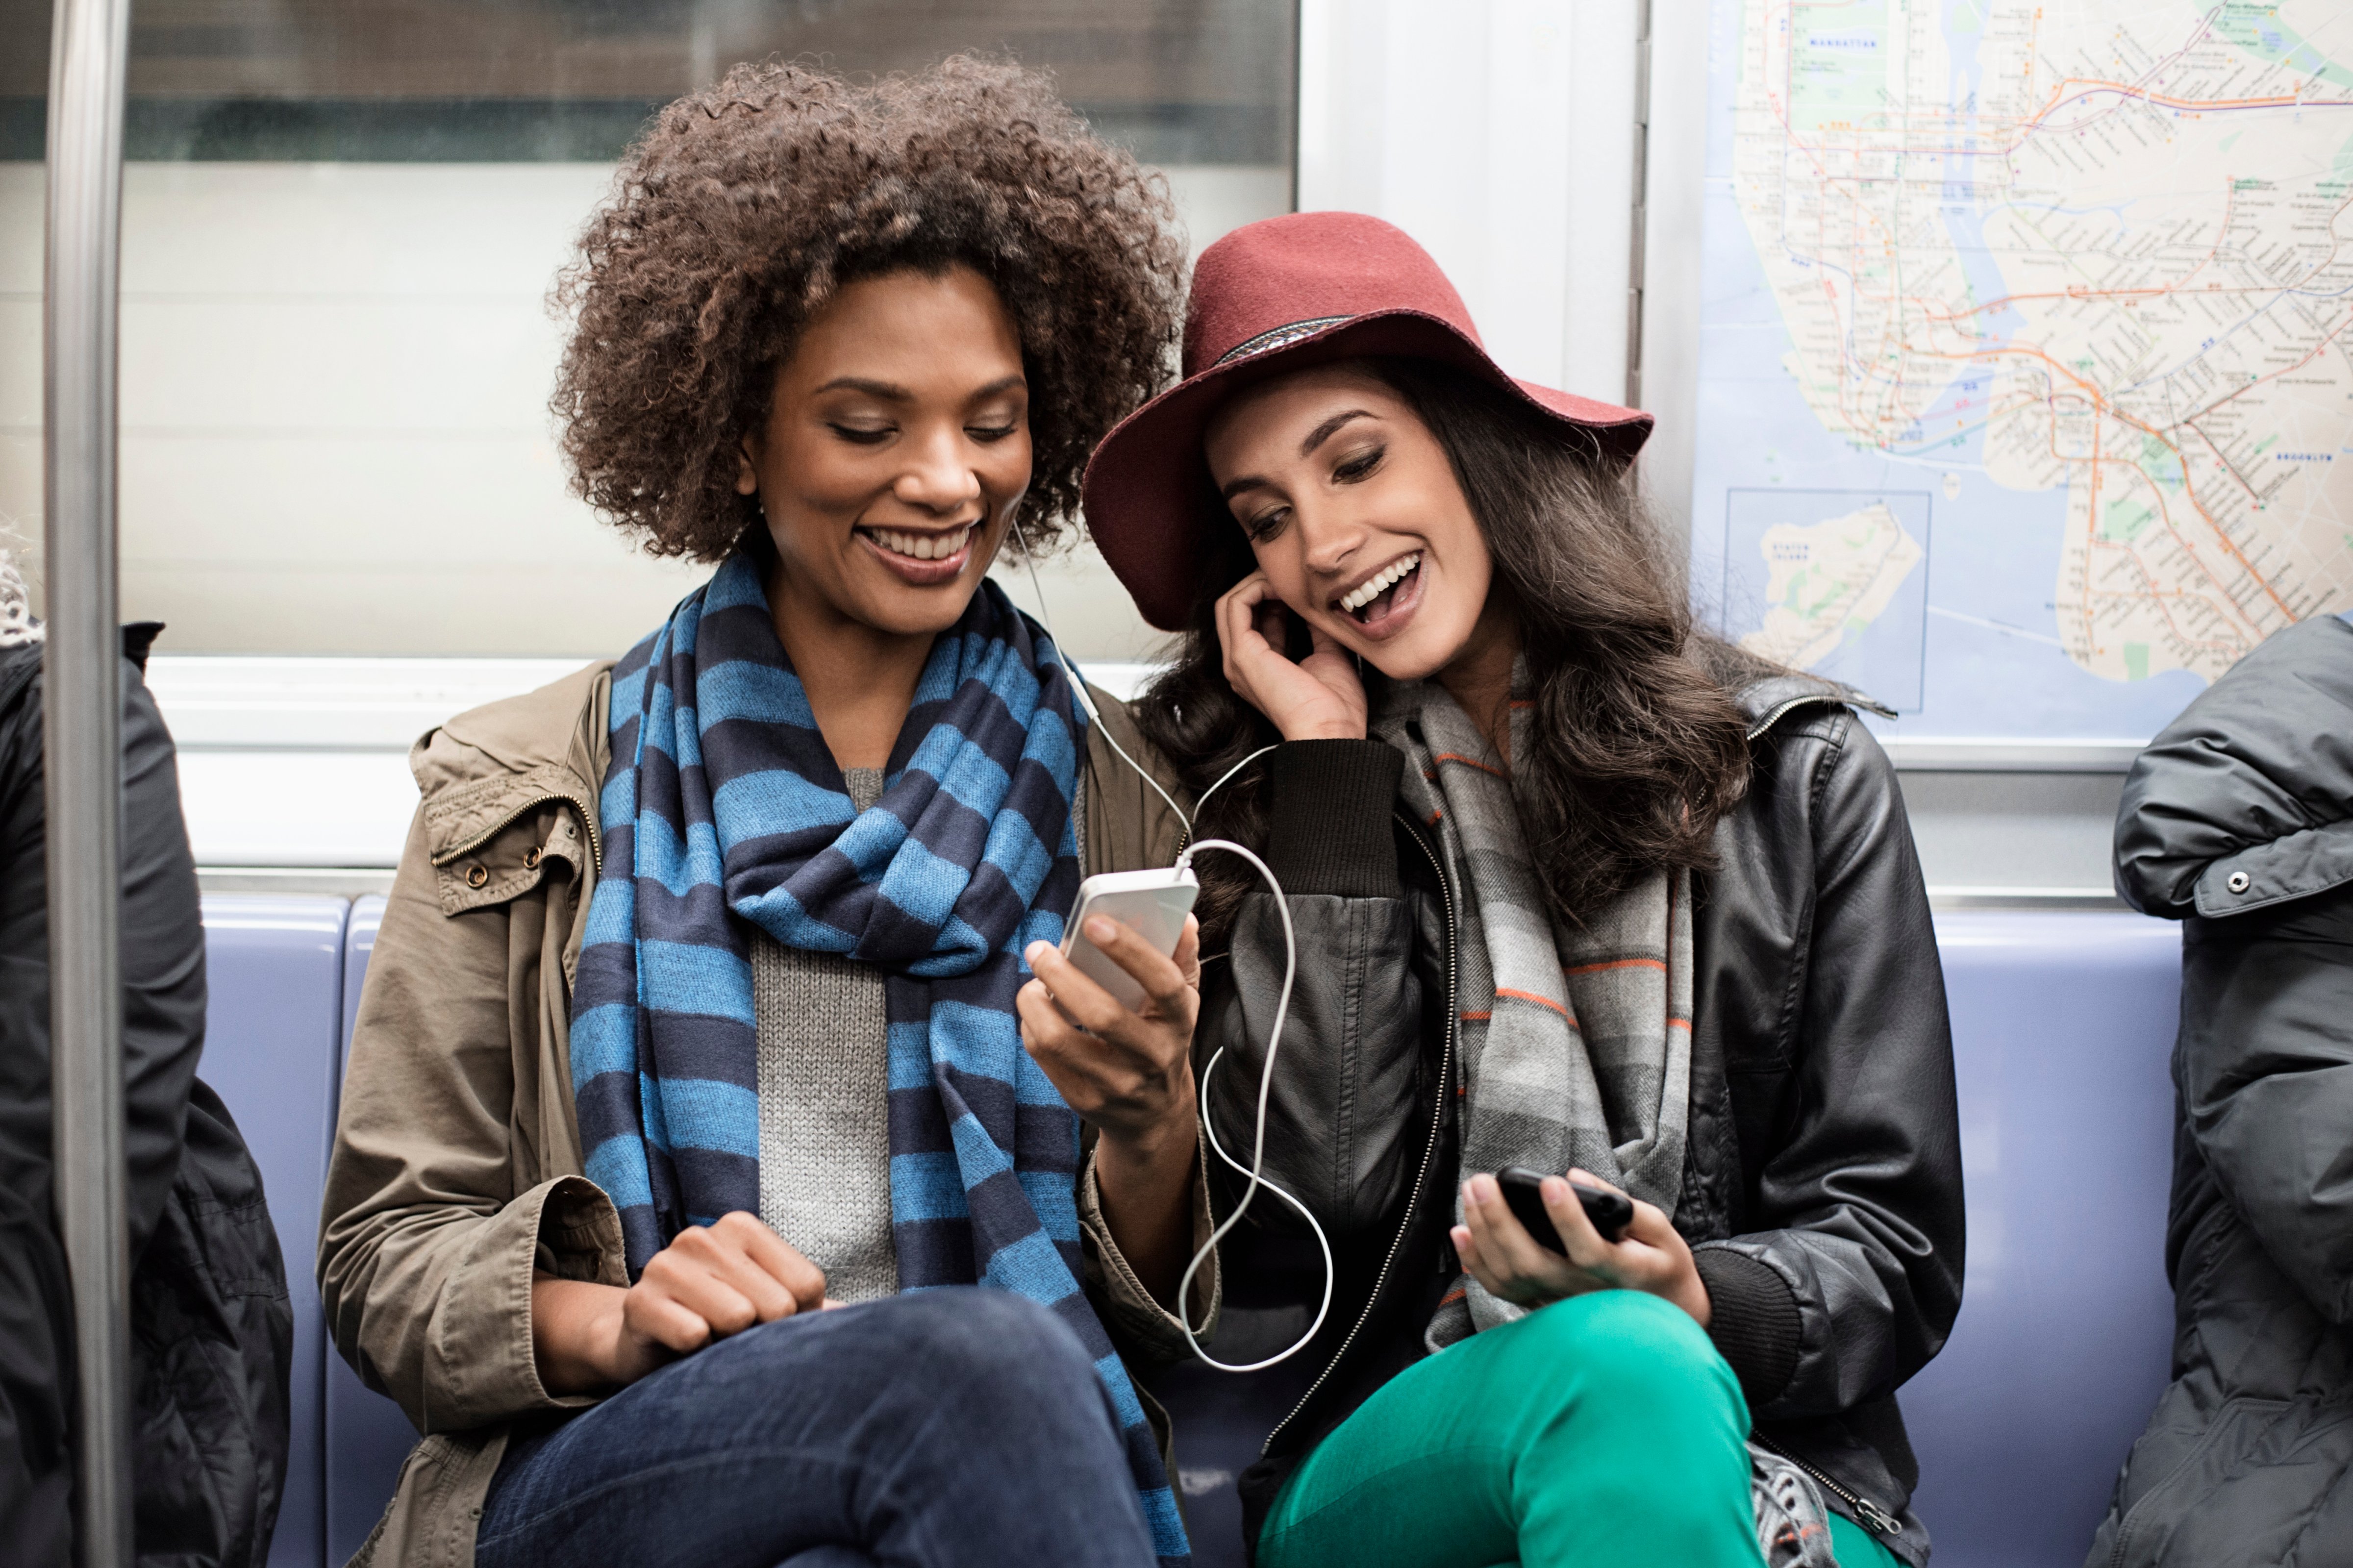 Women sharing earphones on subway (Image Source RF/DreamPictures&mdash;Getty Images/Image Source)